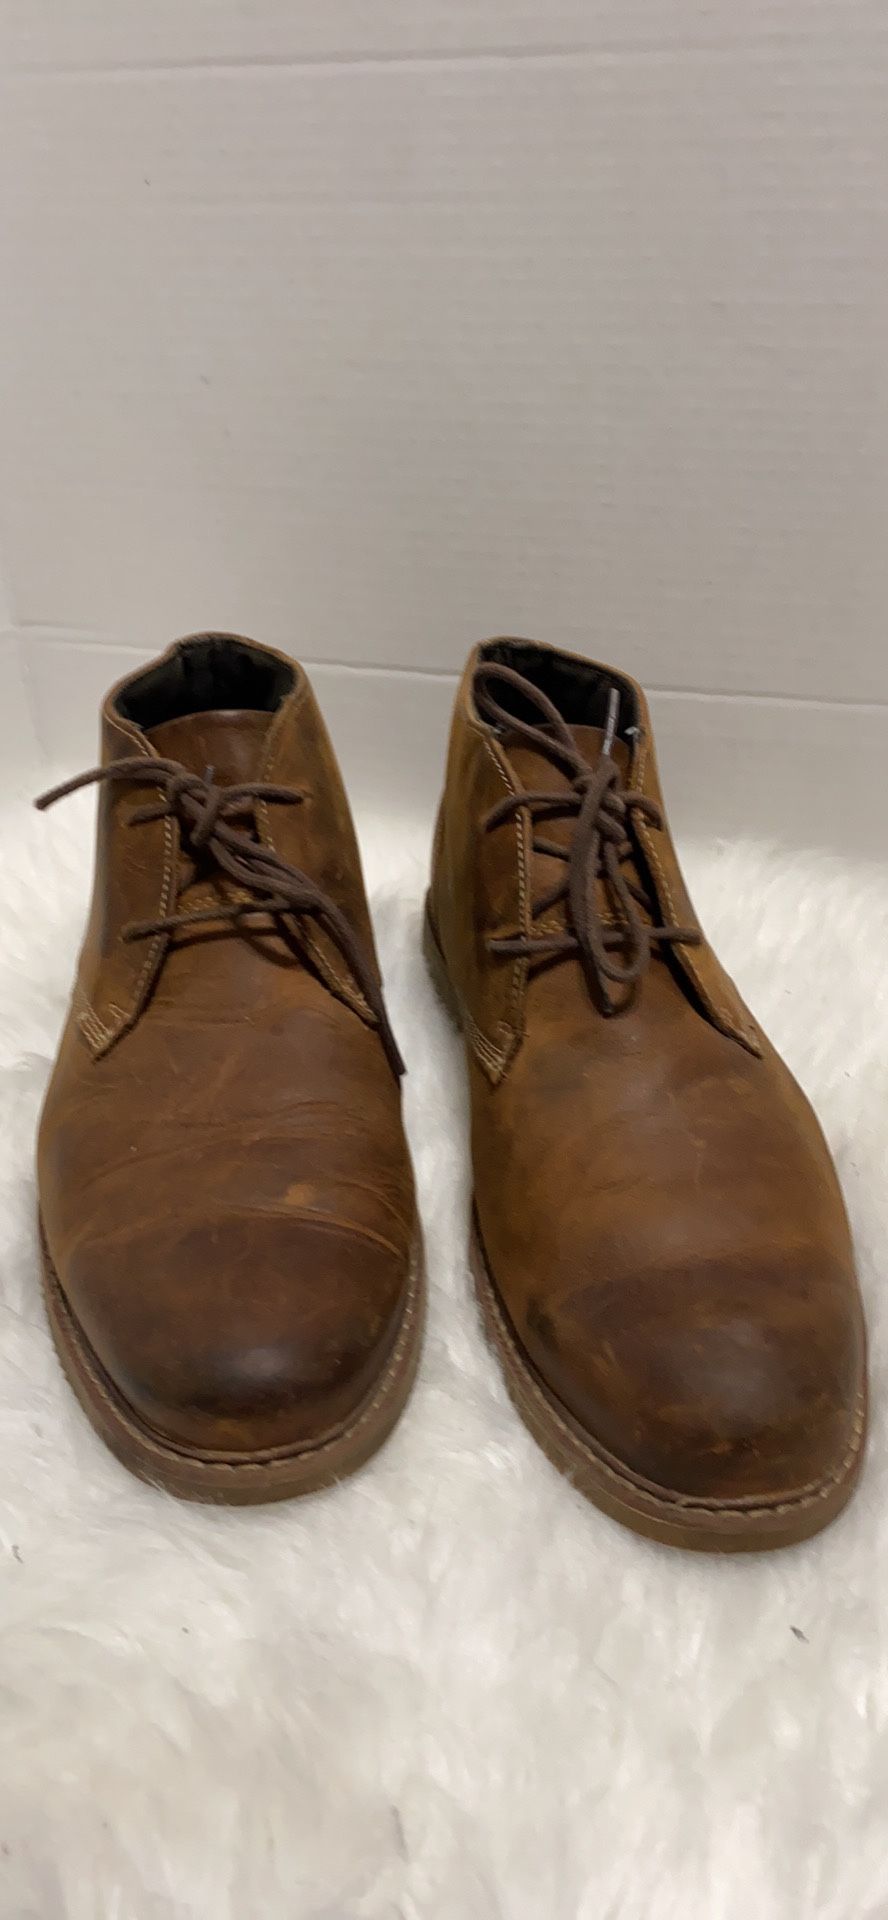 Timberland Men's 2 Eye Lace up Brown Leather Chukka Boot A13JV Brown Size 10 M